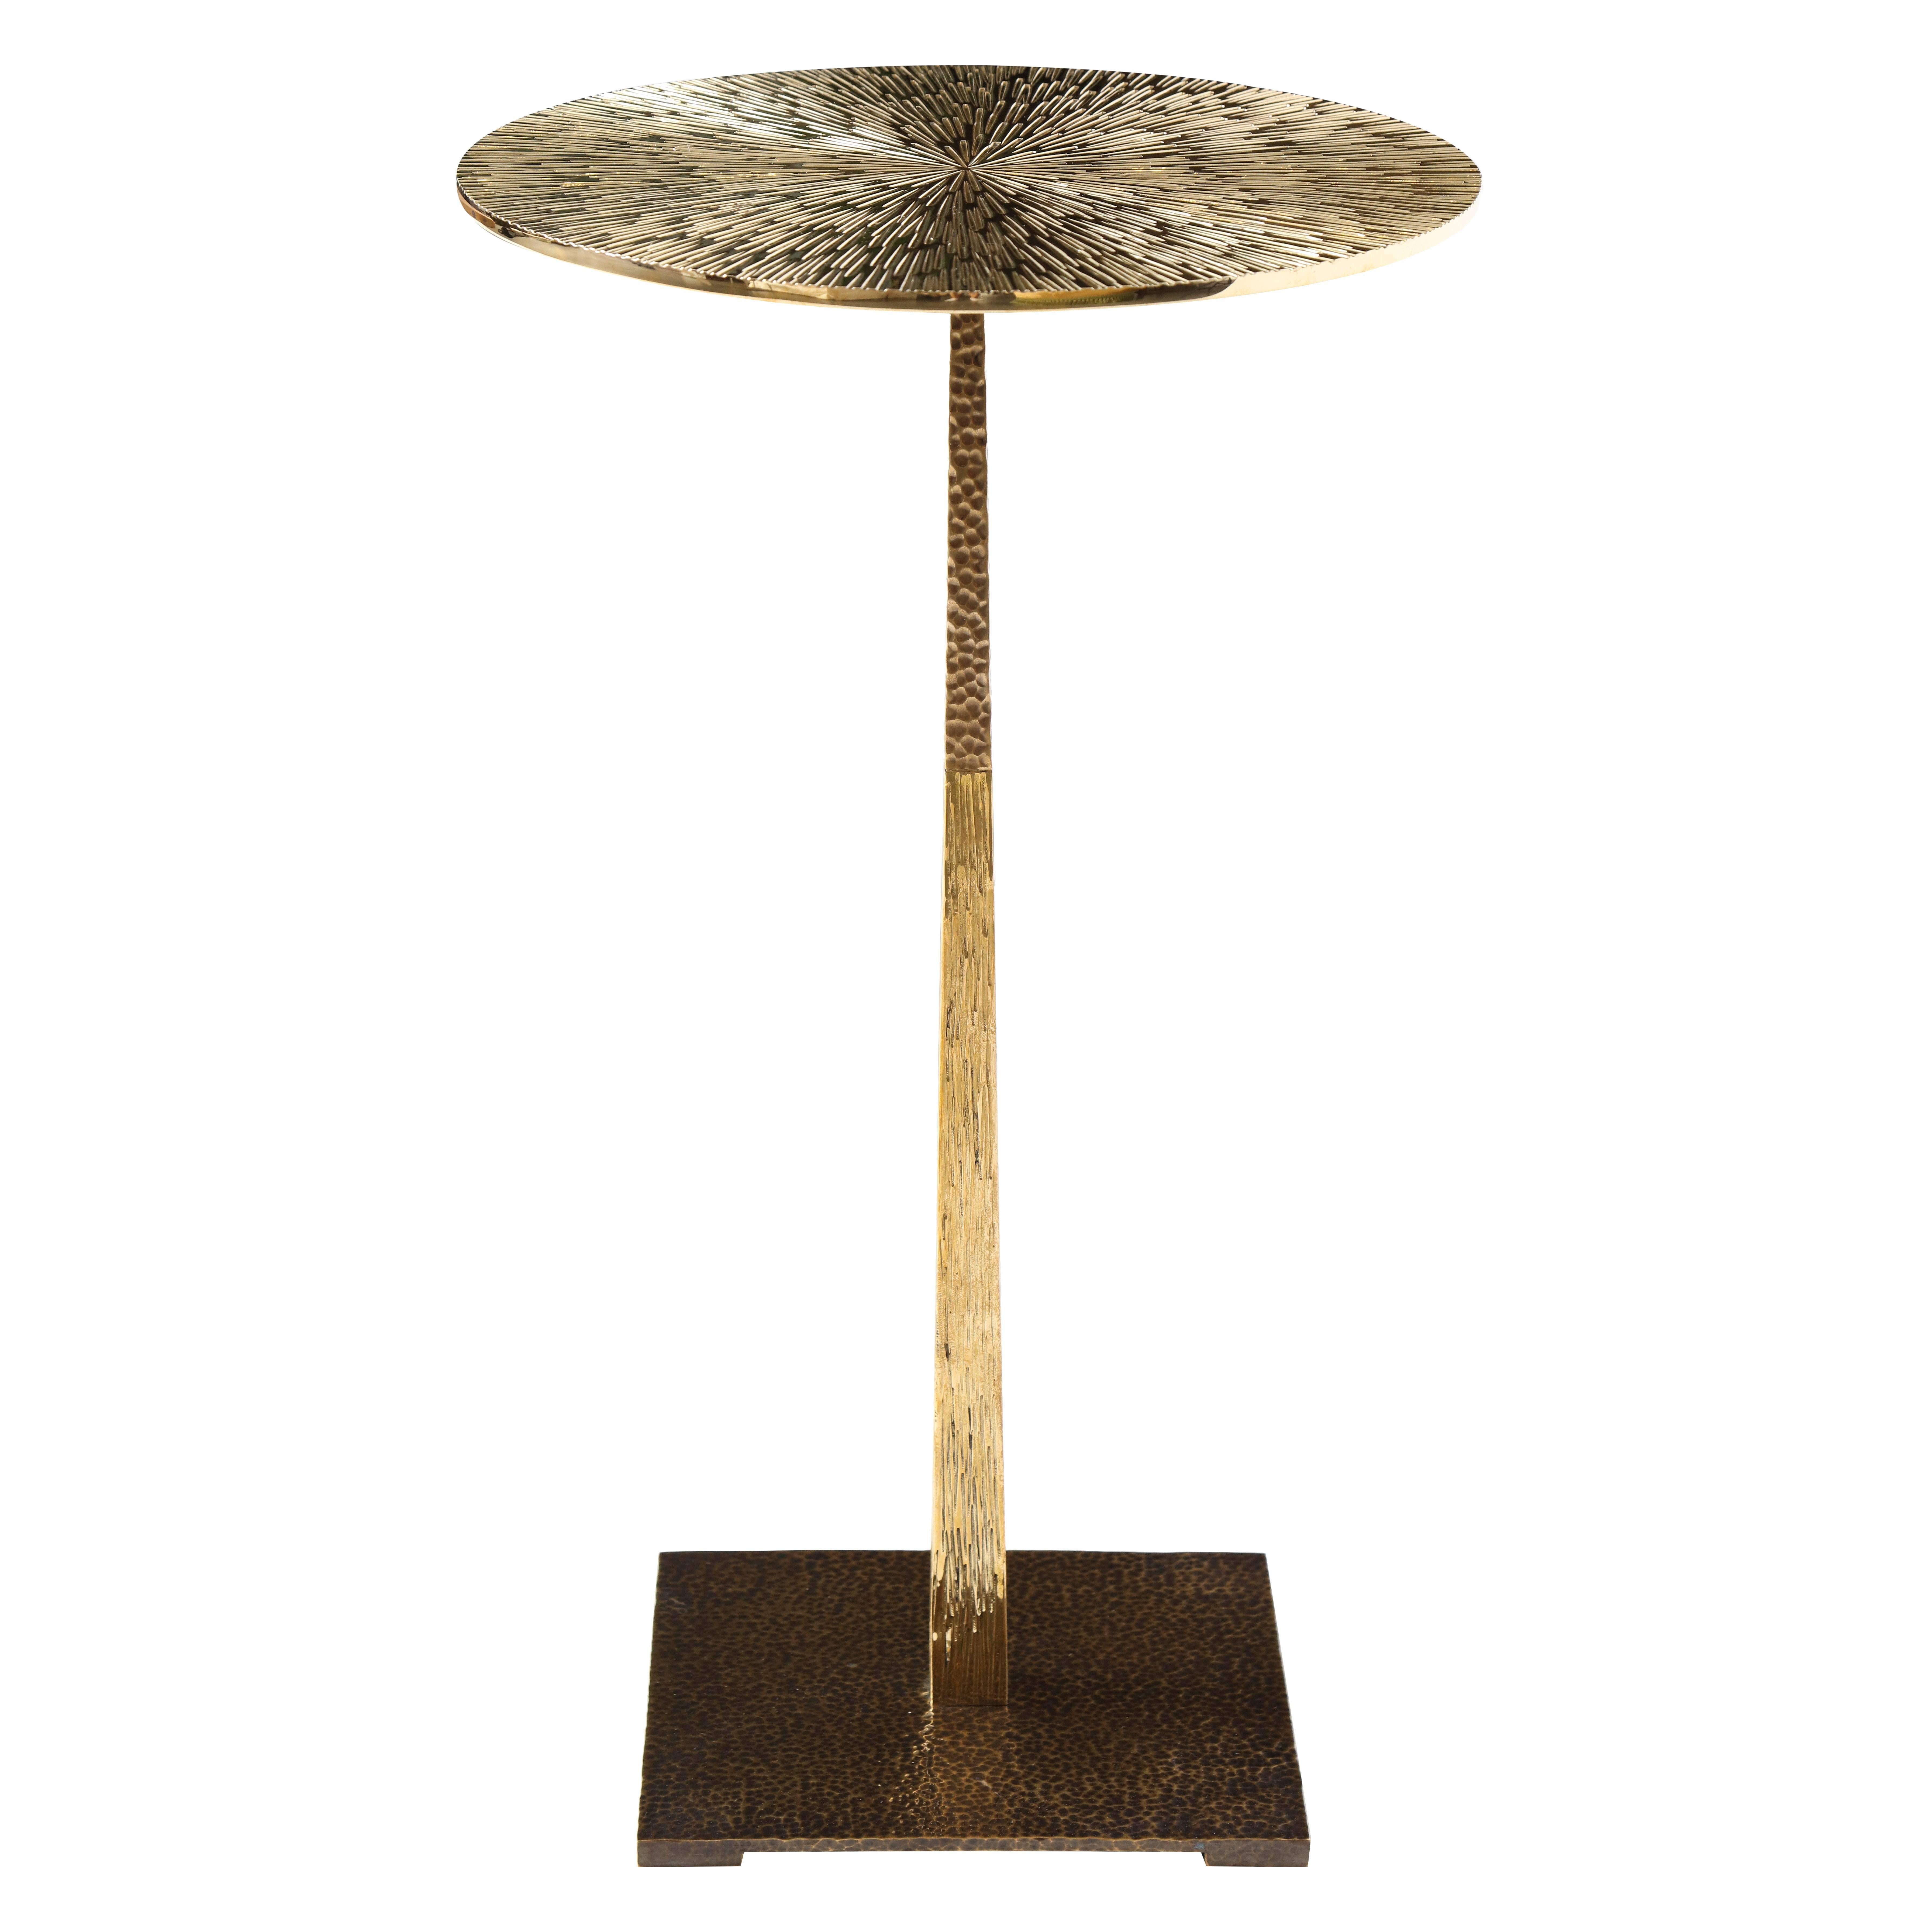 UPAYA CIRCLE Side Table - Polished and Patinated Bronze - by Studio Gallet 